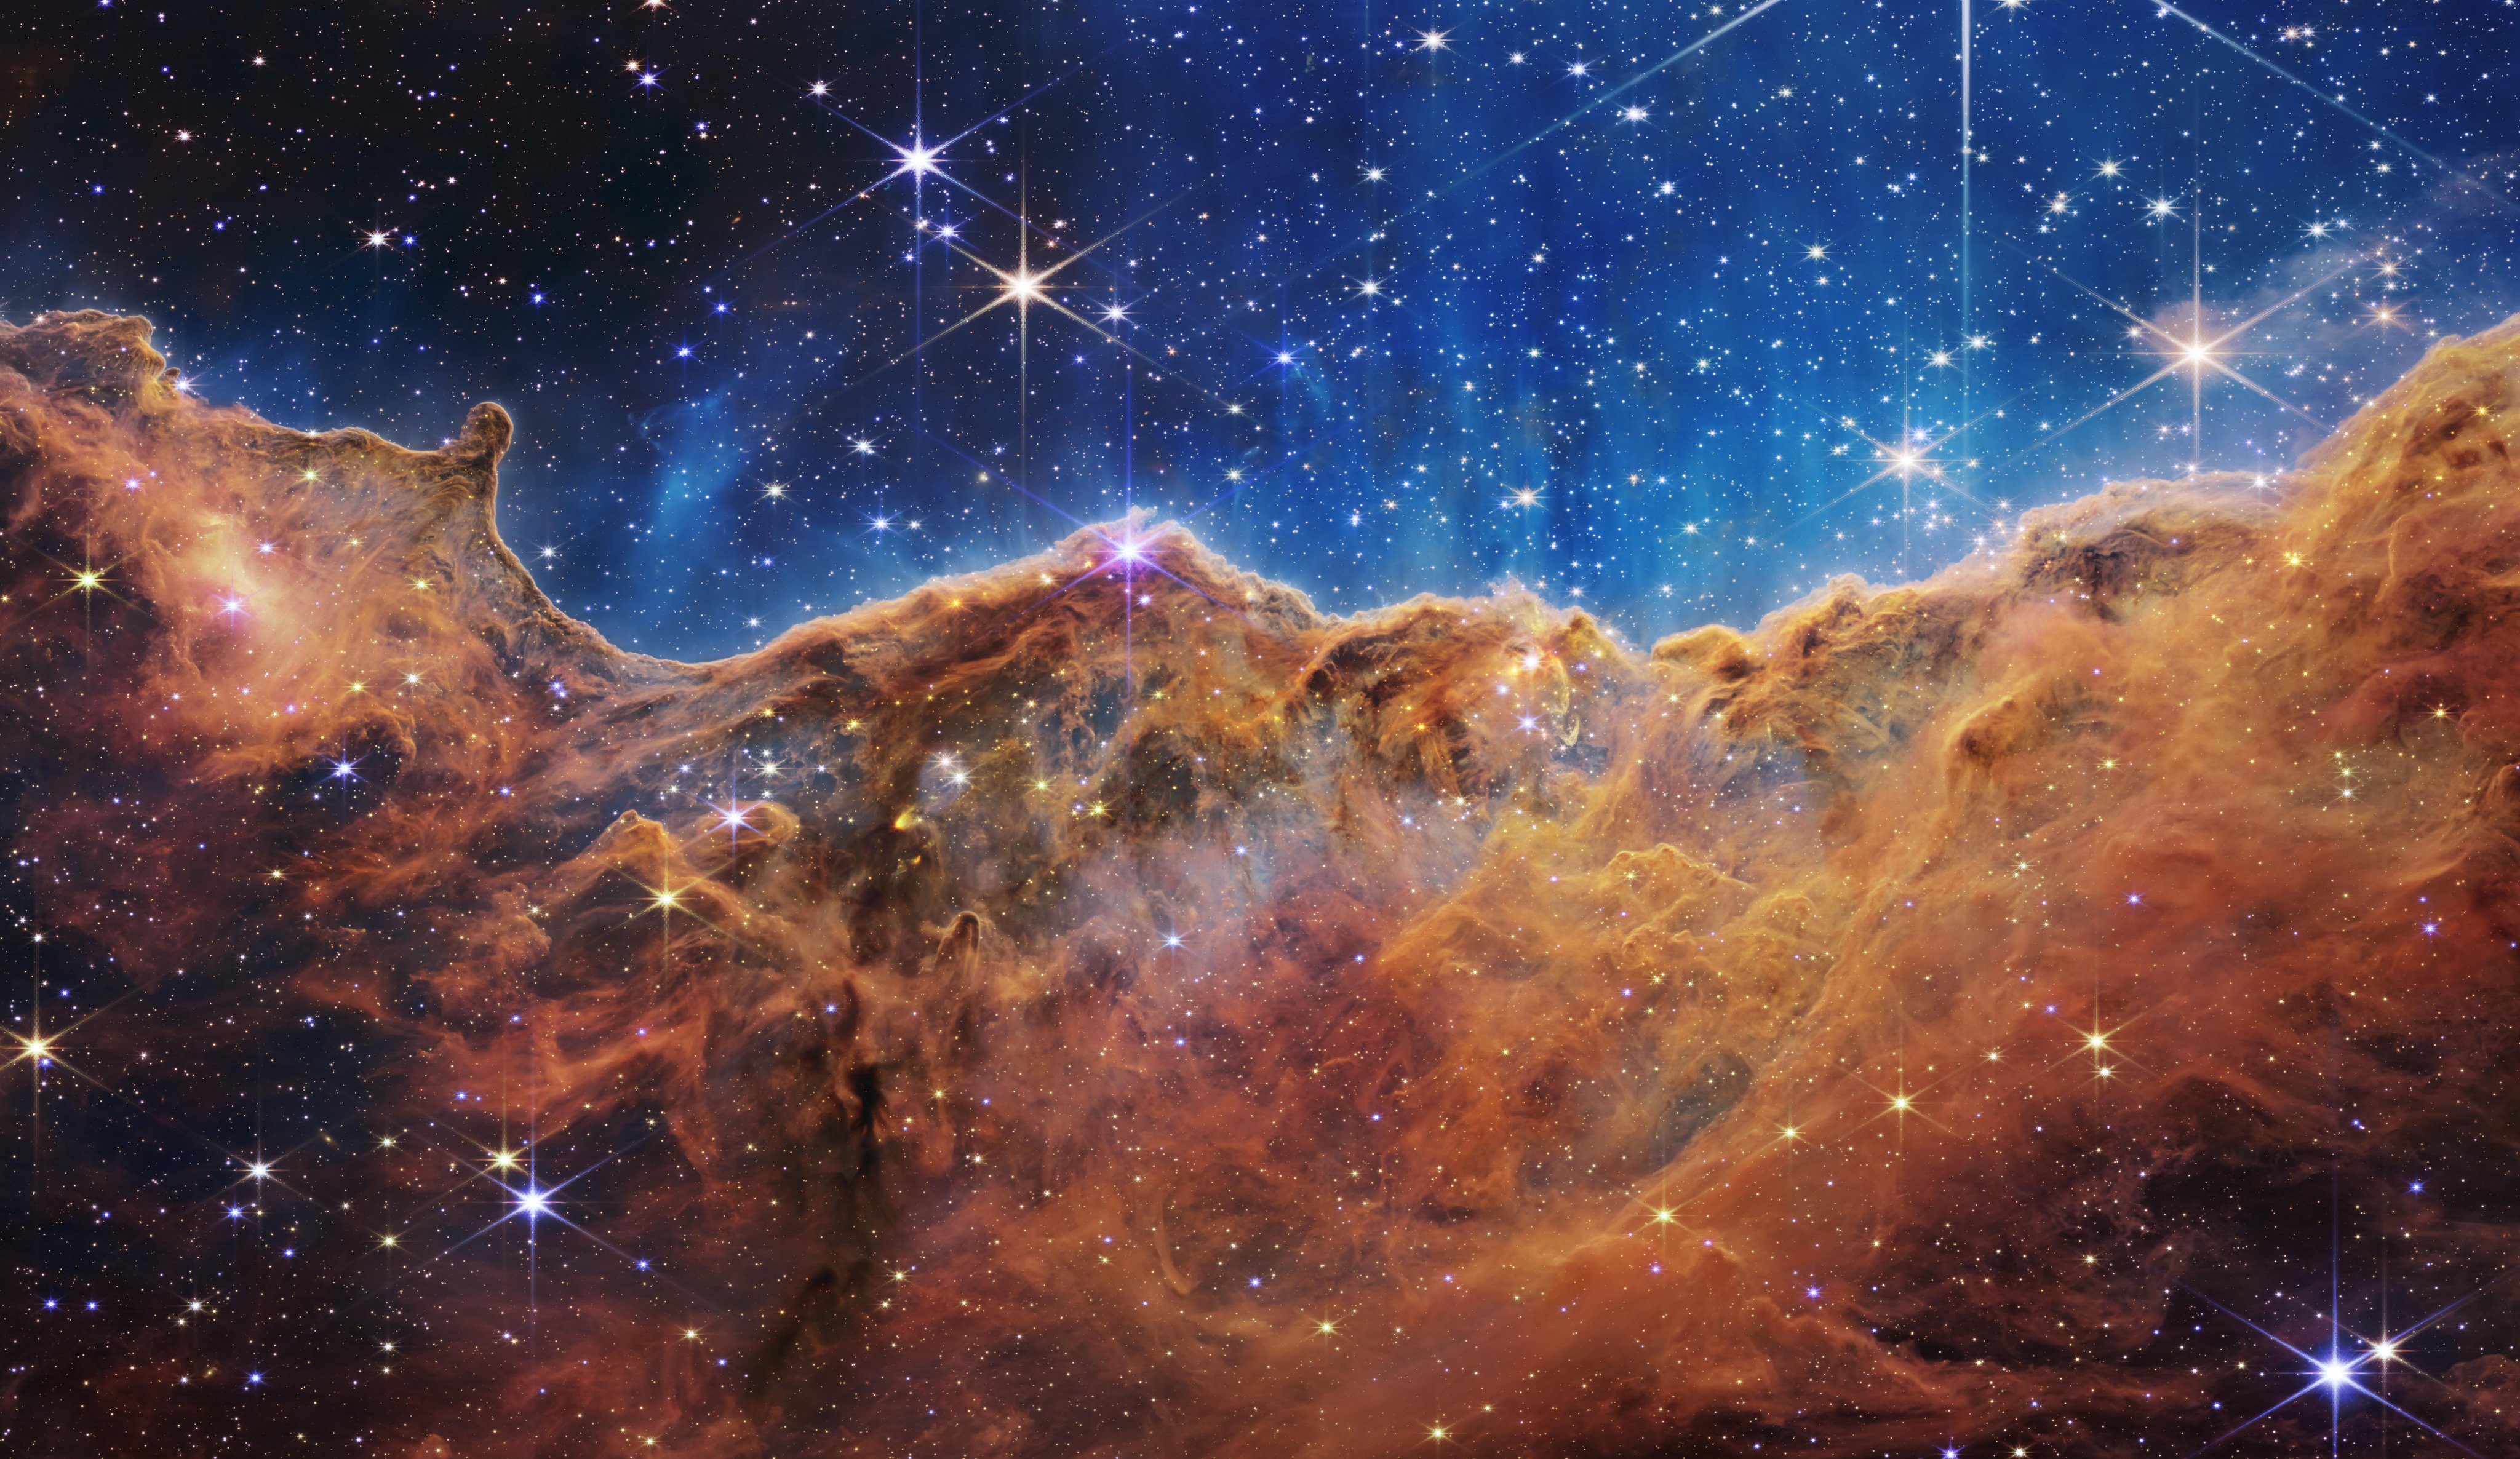 Behind the curtain of dust and gas in these “Cosmic Cliffs